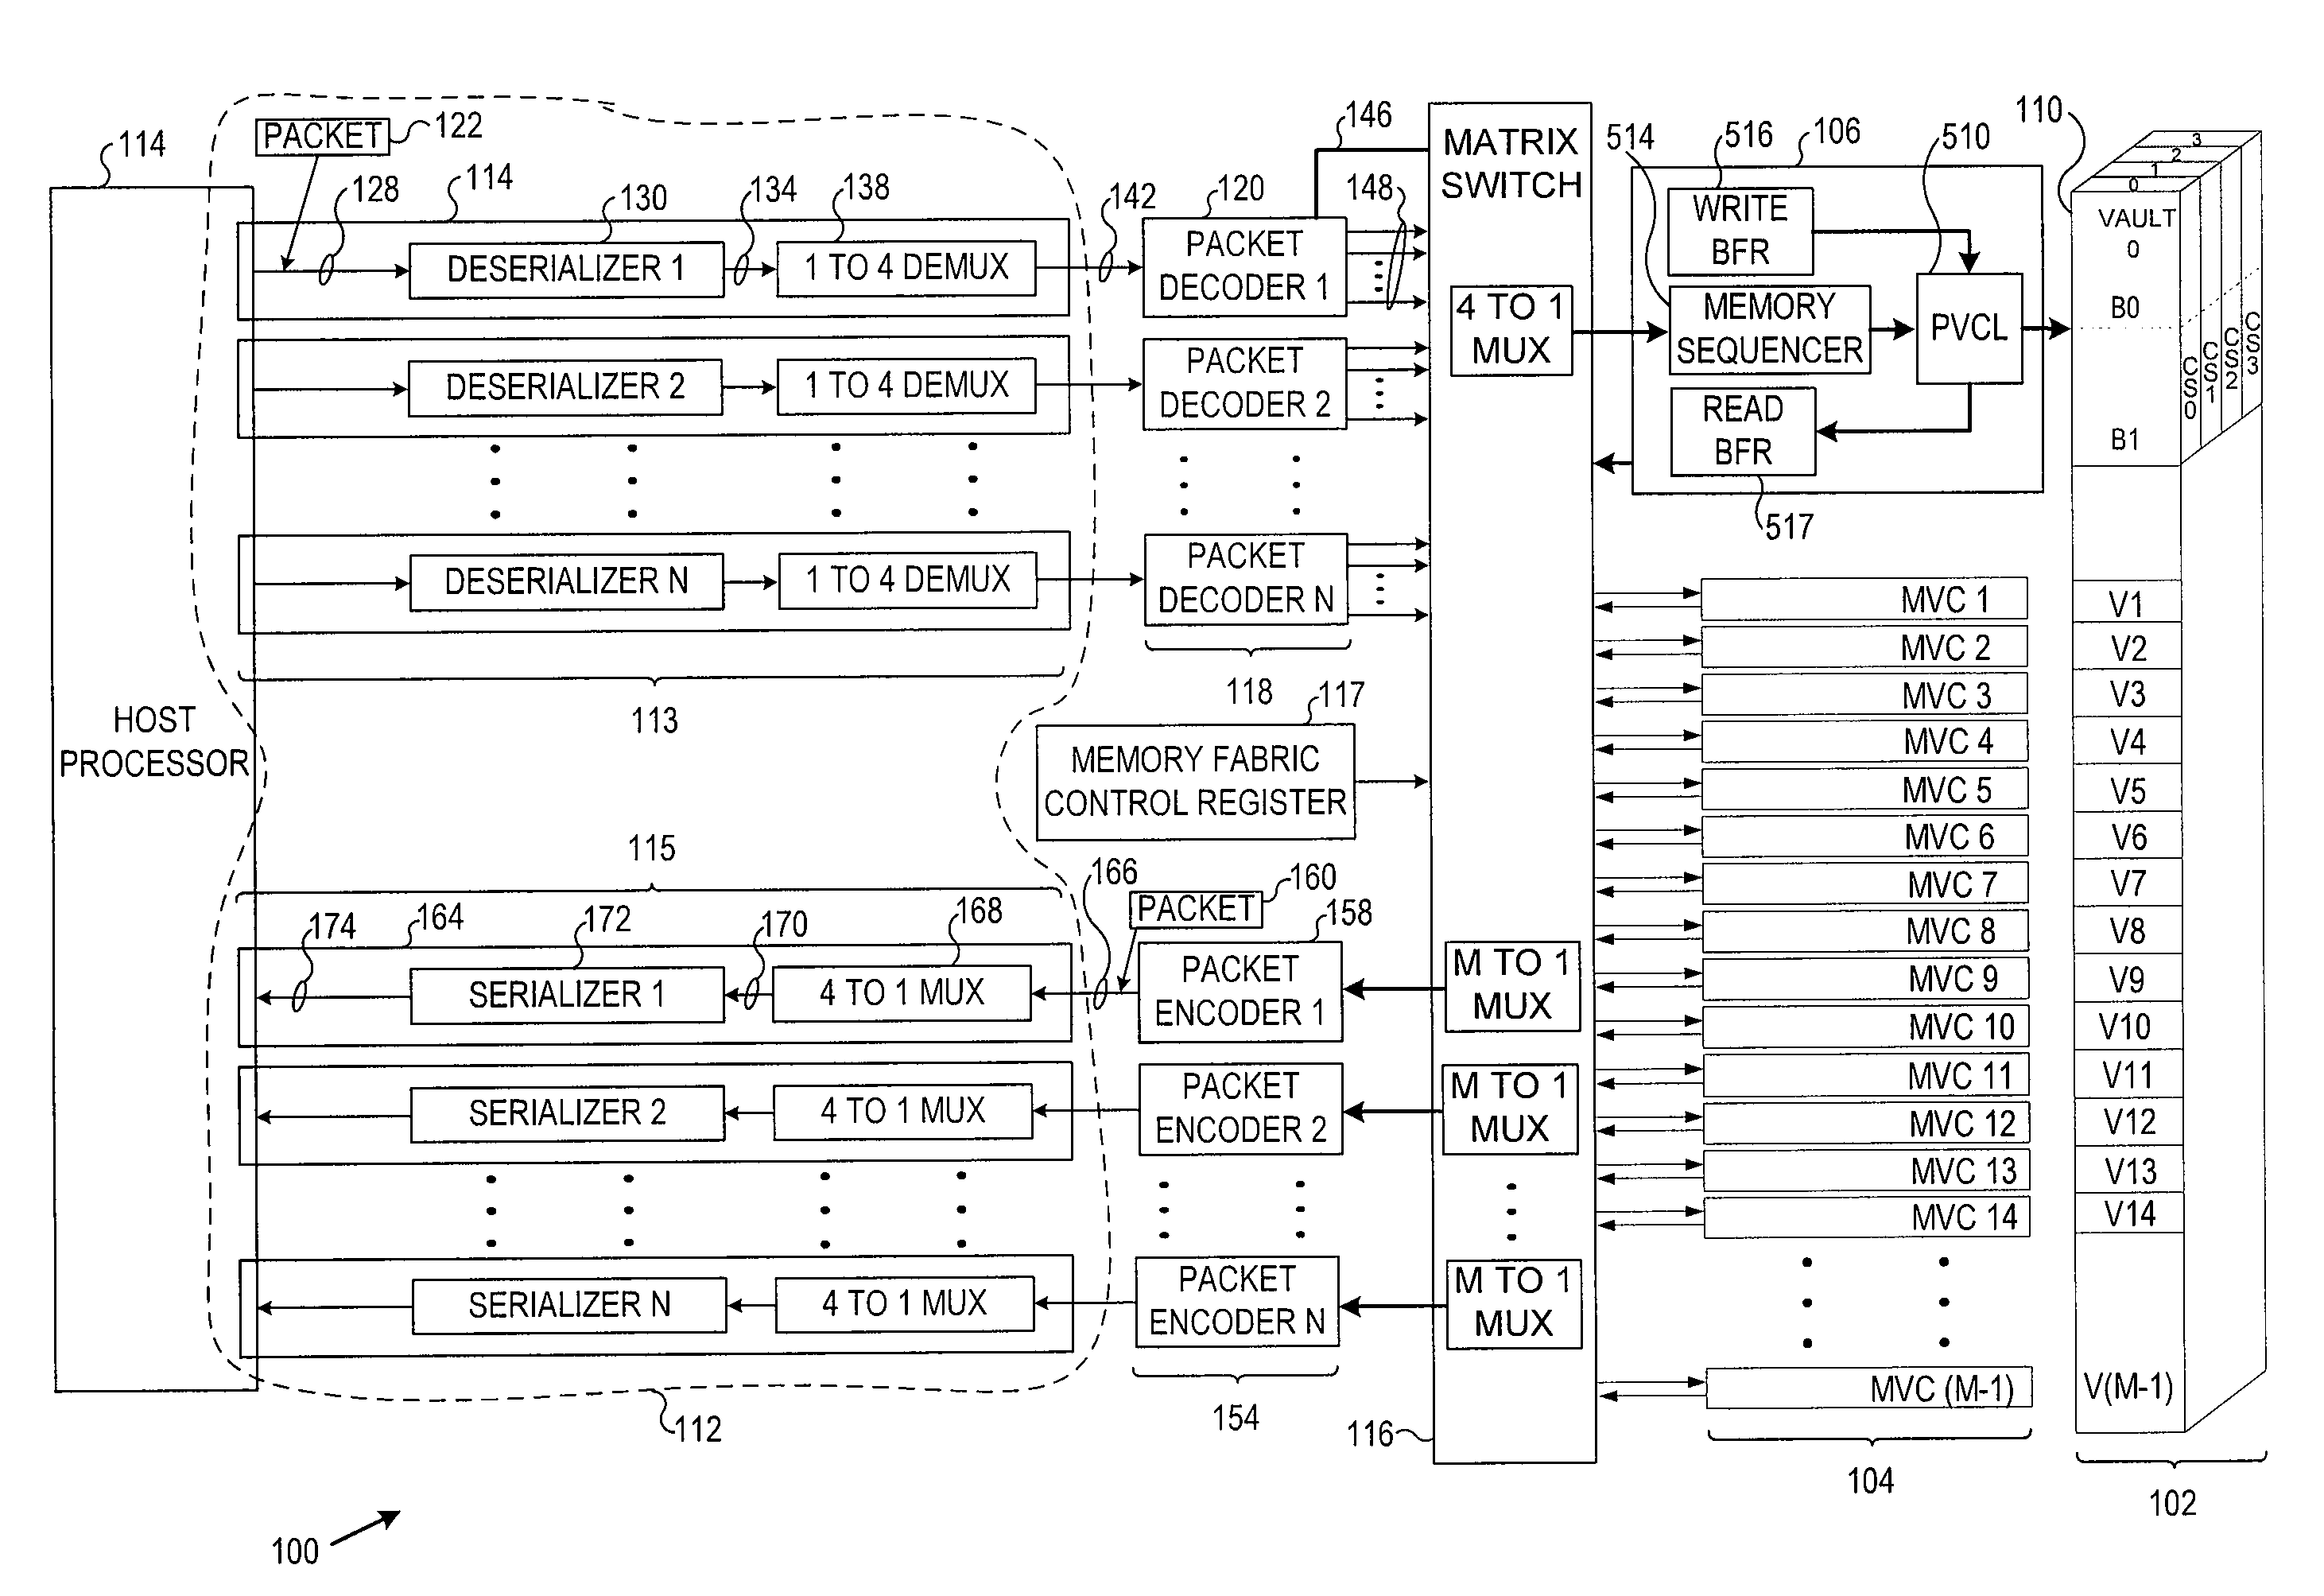 Systems and methods for monitoring a memory system